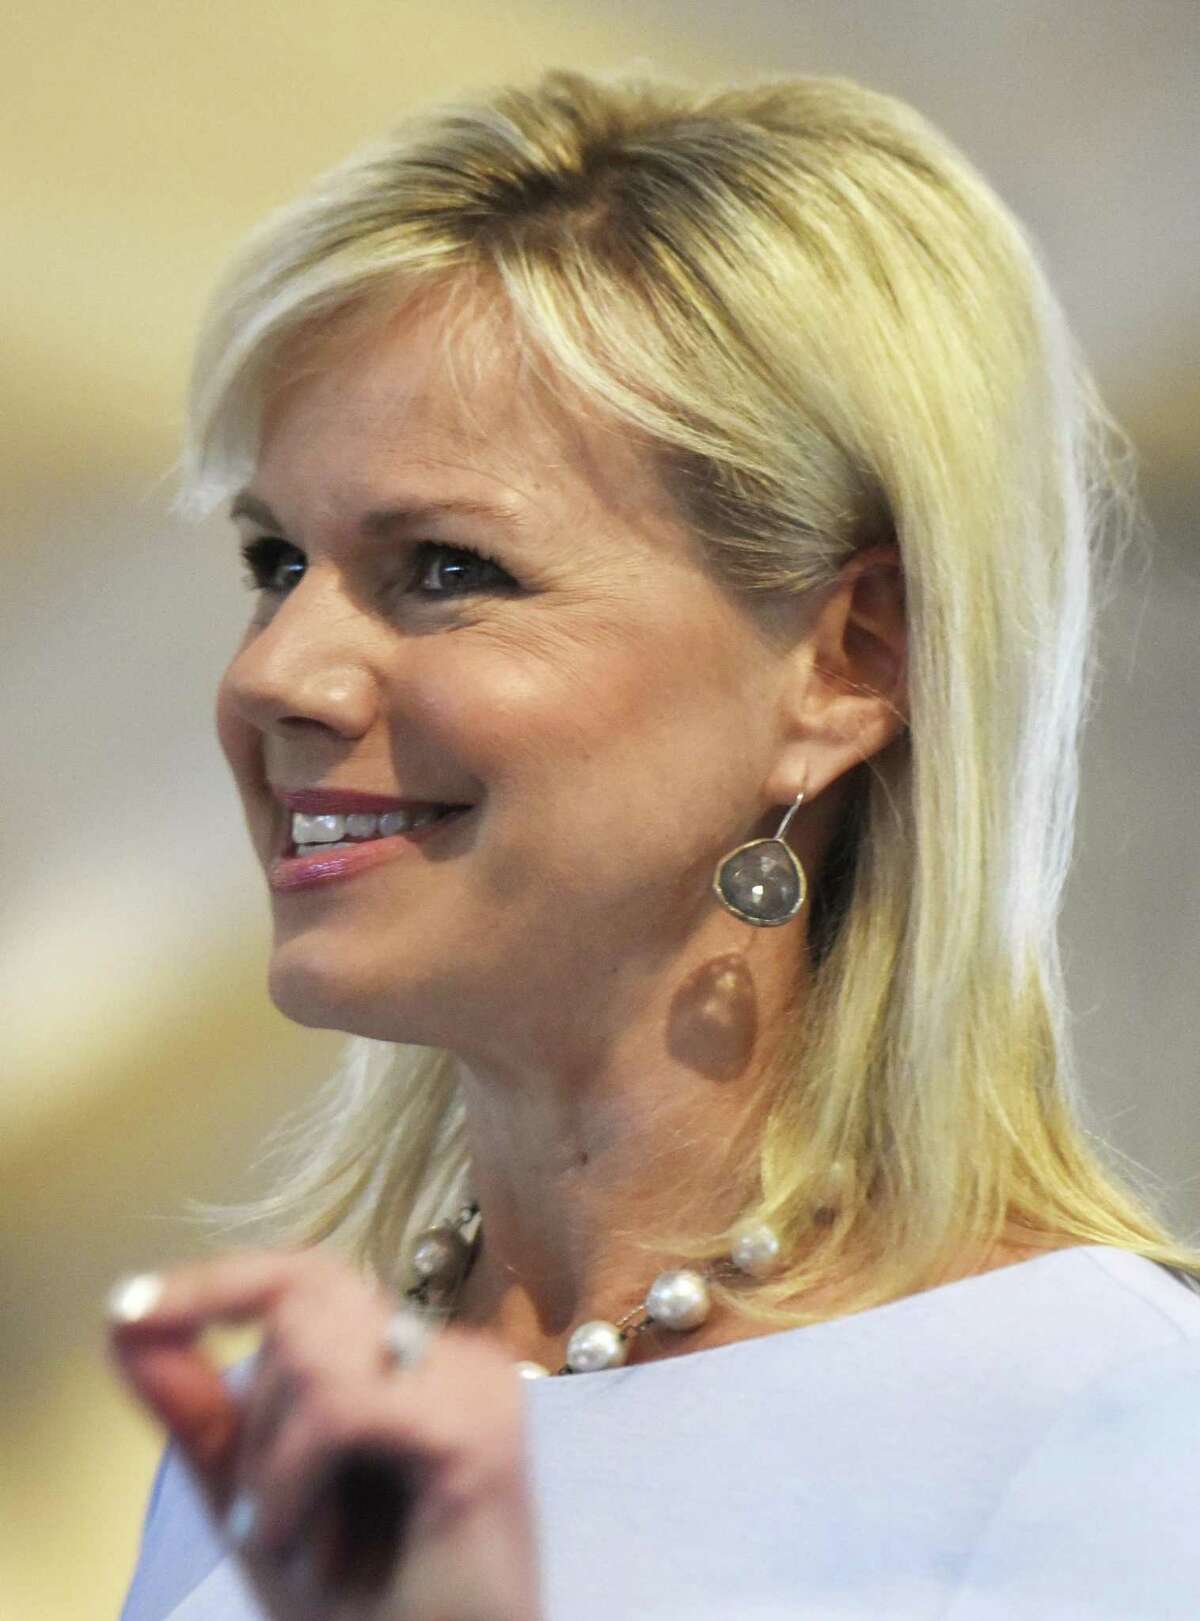 Author and former FOX News host Gretchen Carlson speaks at the United Way of Greenwich Sole Sisters Luncheon at Greenwich Country Club in Greenwich, Conn. Tuesday, April 25, 2017. Carlson, a Greenwich resident, delivered the keynote presentation, speaking about the times she experienced sexual harassment throughout her life and how it impacted her career.